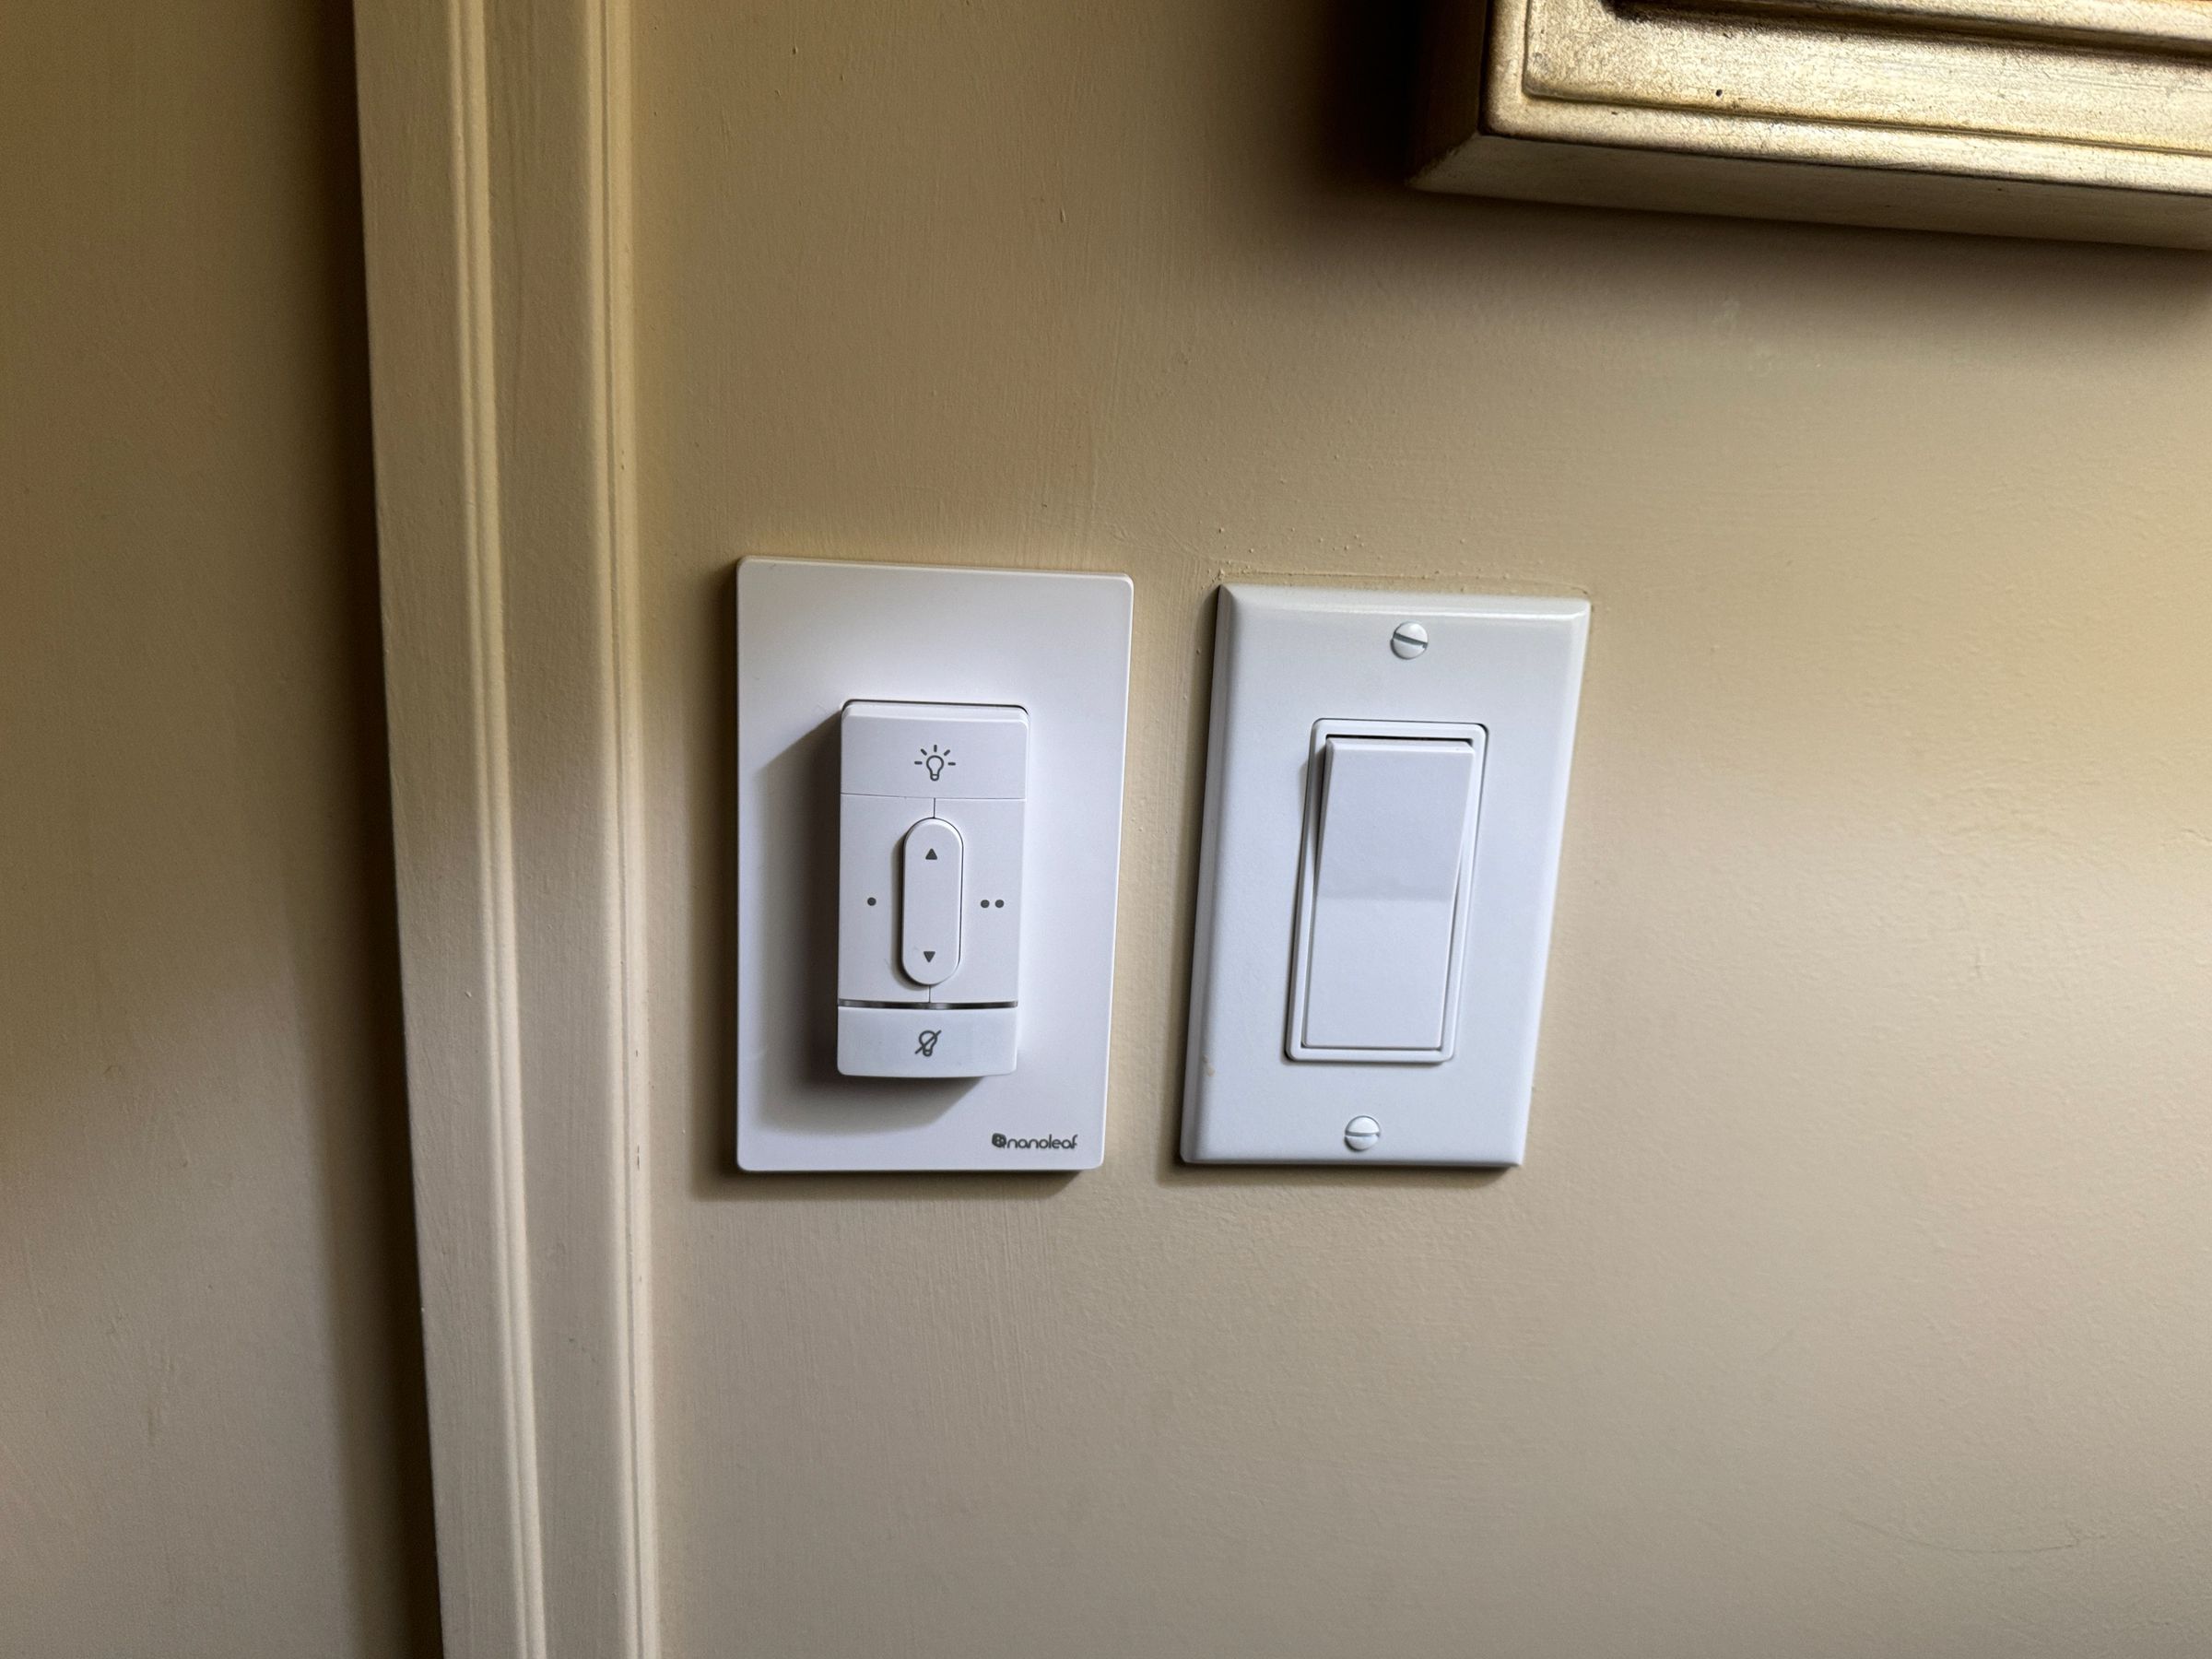 Nanoleaf’s new smart wireless switches (left, next to a standard switch) work over Thread and Matter and can be removed from the wall to act as a remote control. They are scheduled to arrive this summer.